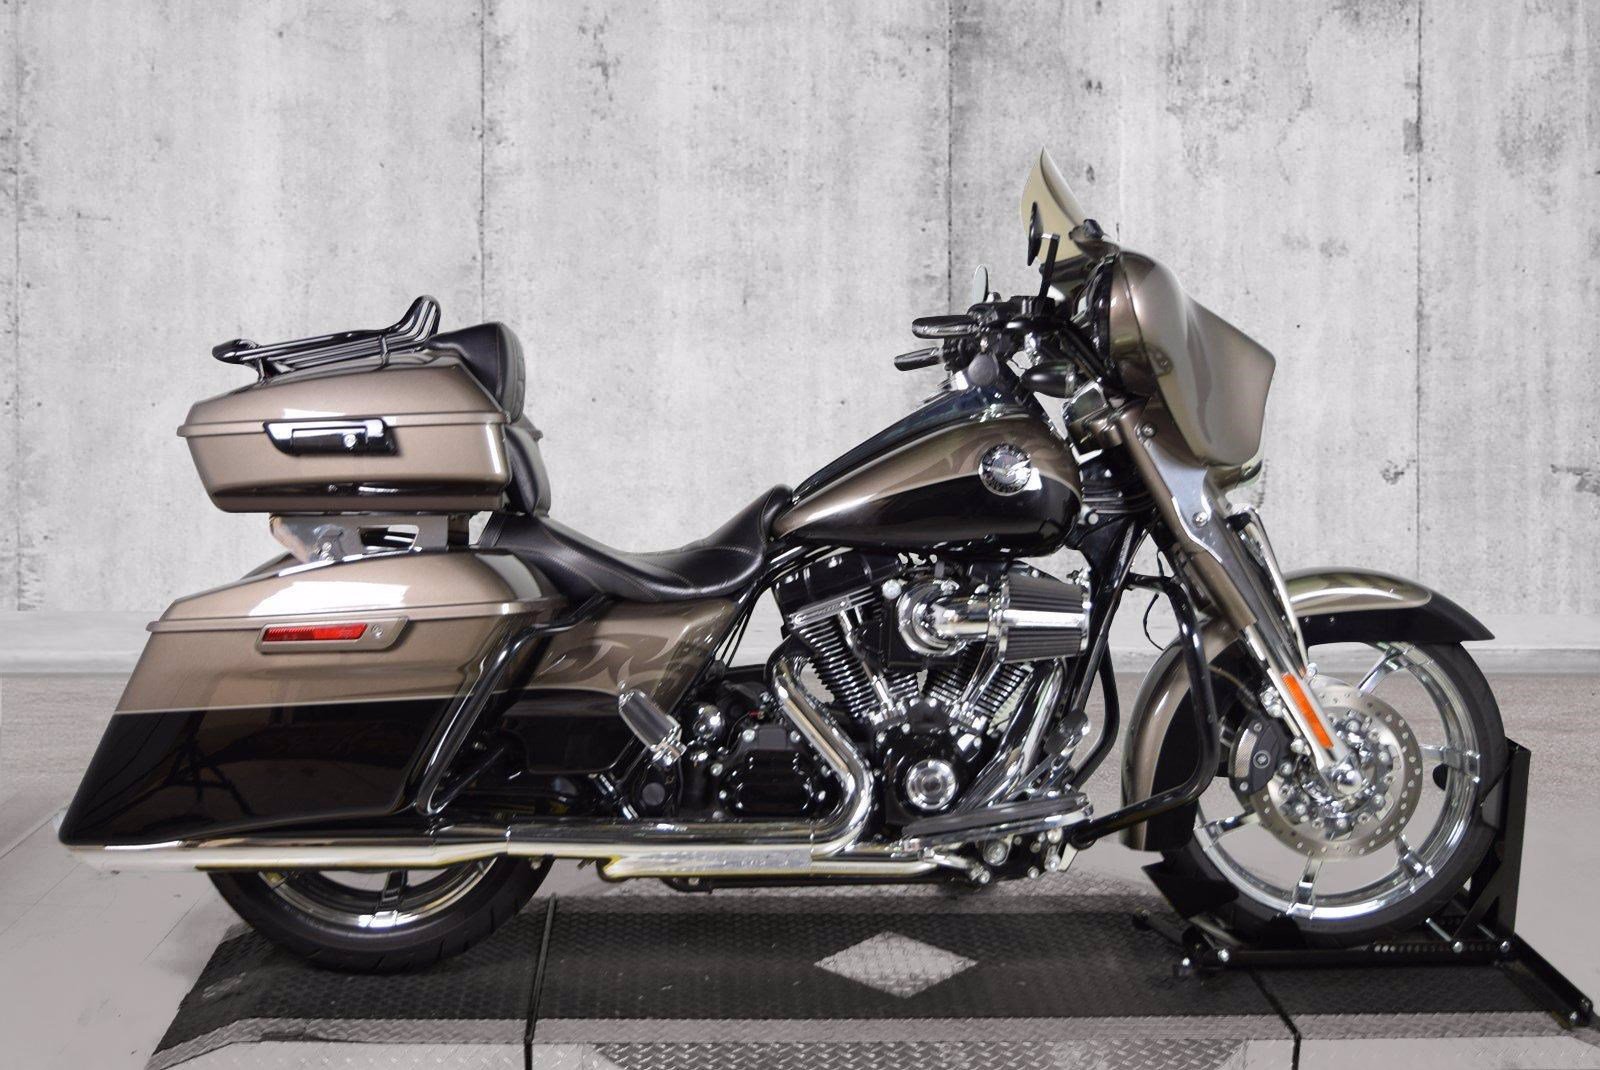 PreOwned 2014 HarleyDavidson Road King CVO FLHRSE CVO/Touring in